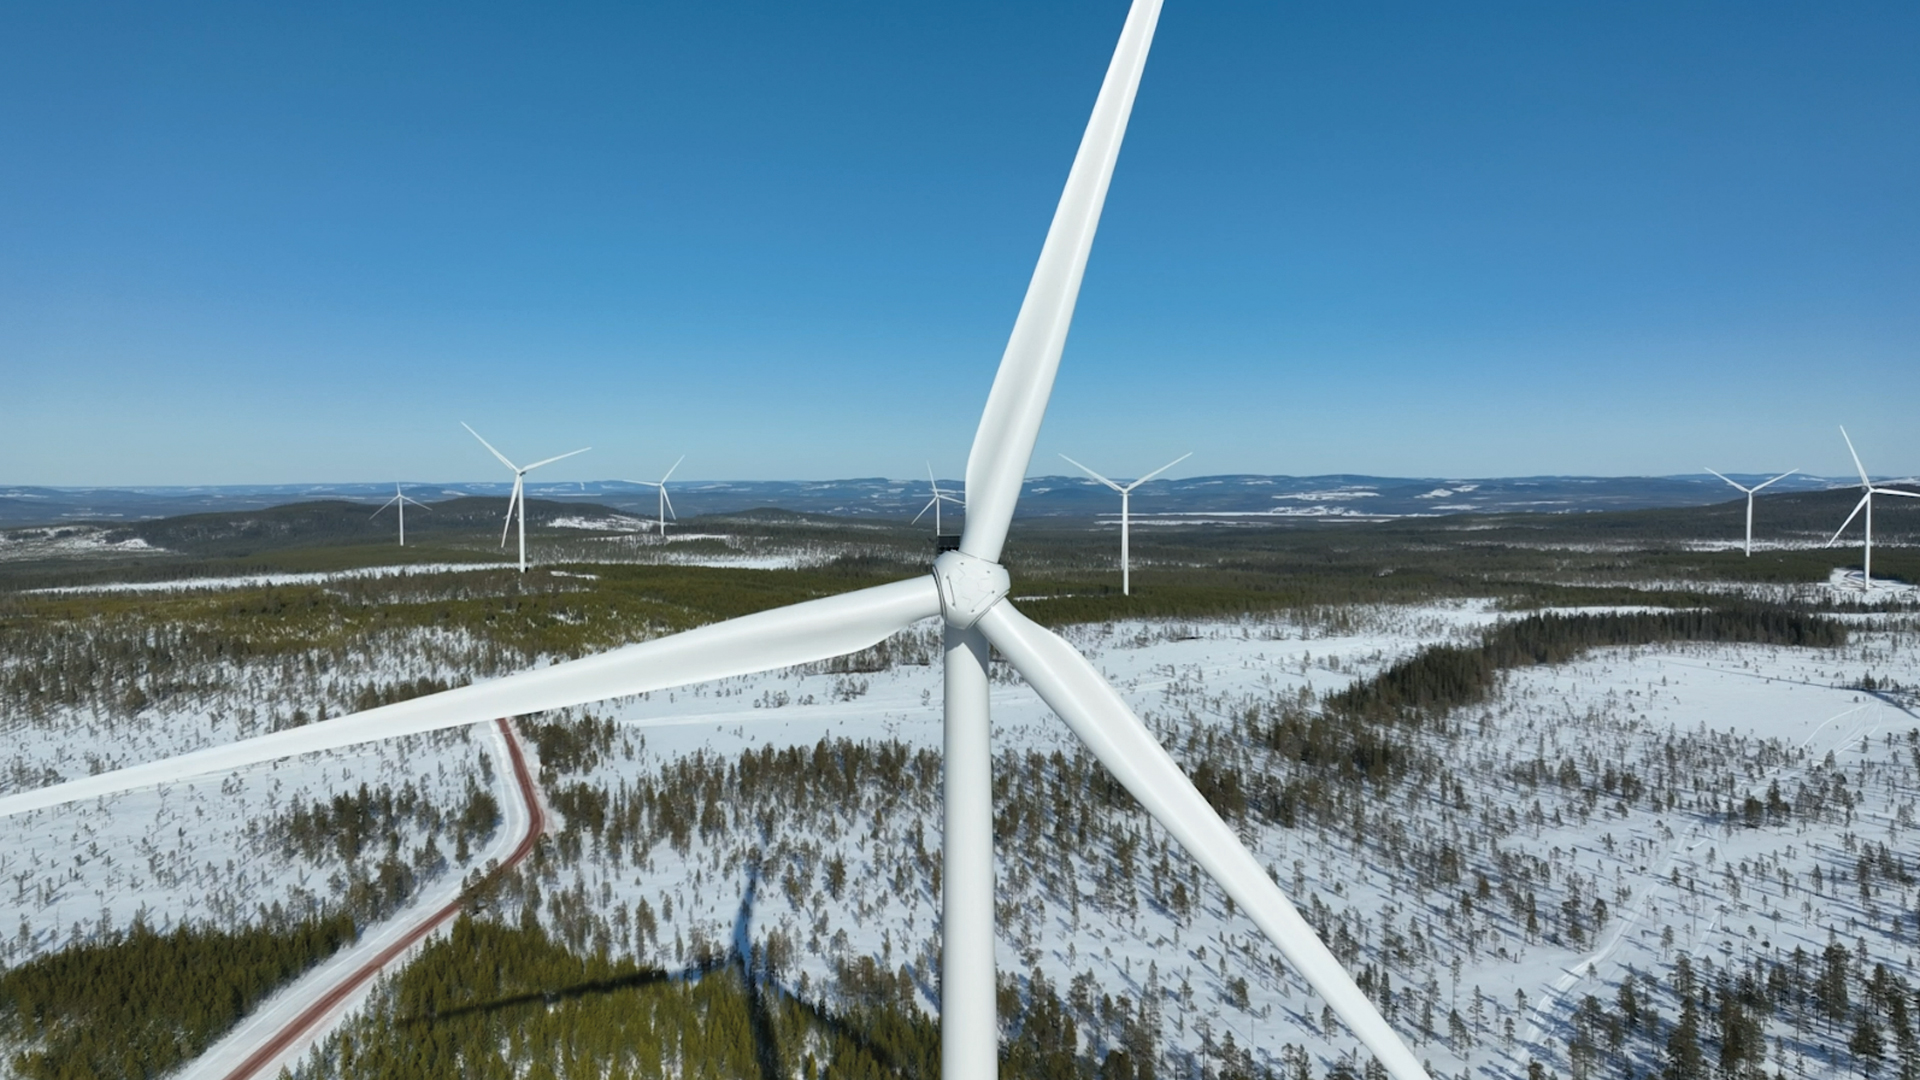 Åndberg wind farm: Cutting-edge technology delivers sustainable energy ...